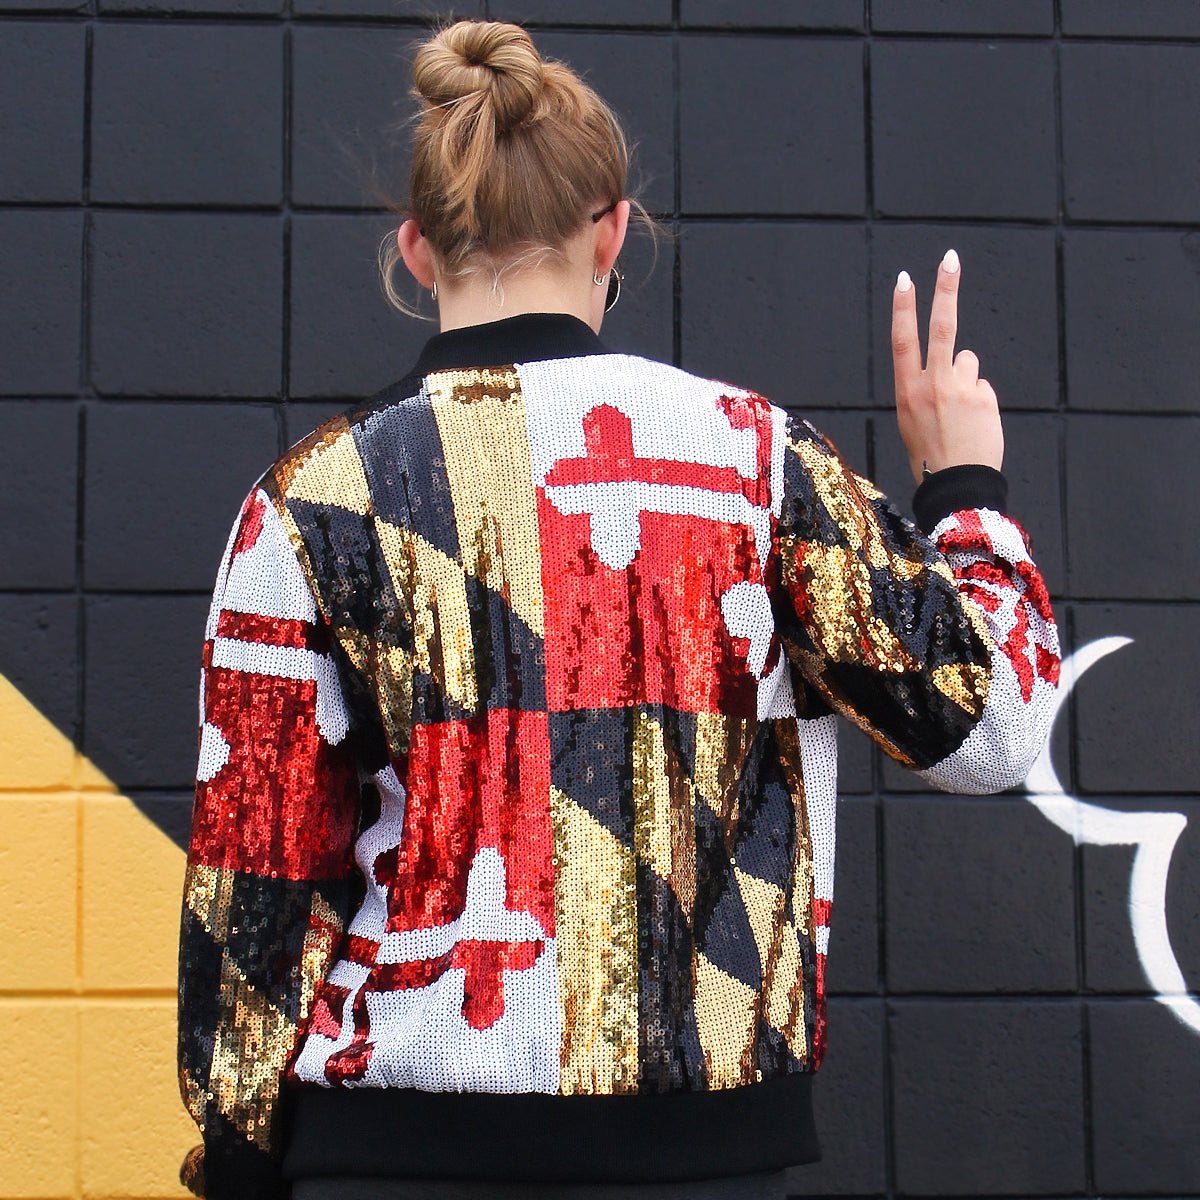 *PRE-ORDER* Maryland Flag / Sequin Jacket (Estimated Ship Date: 7/1) - Route One Apparel